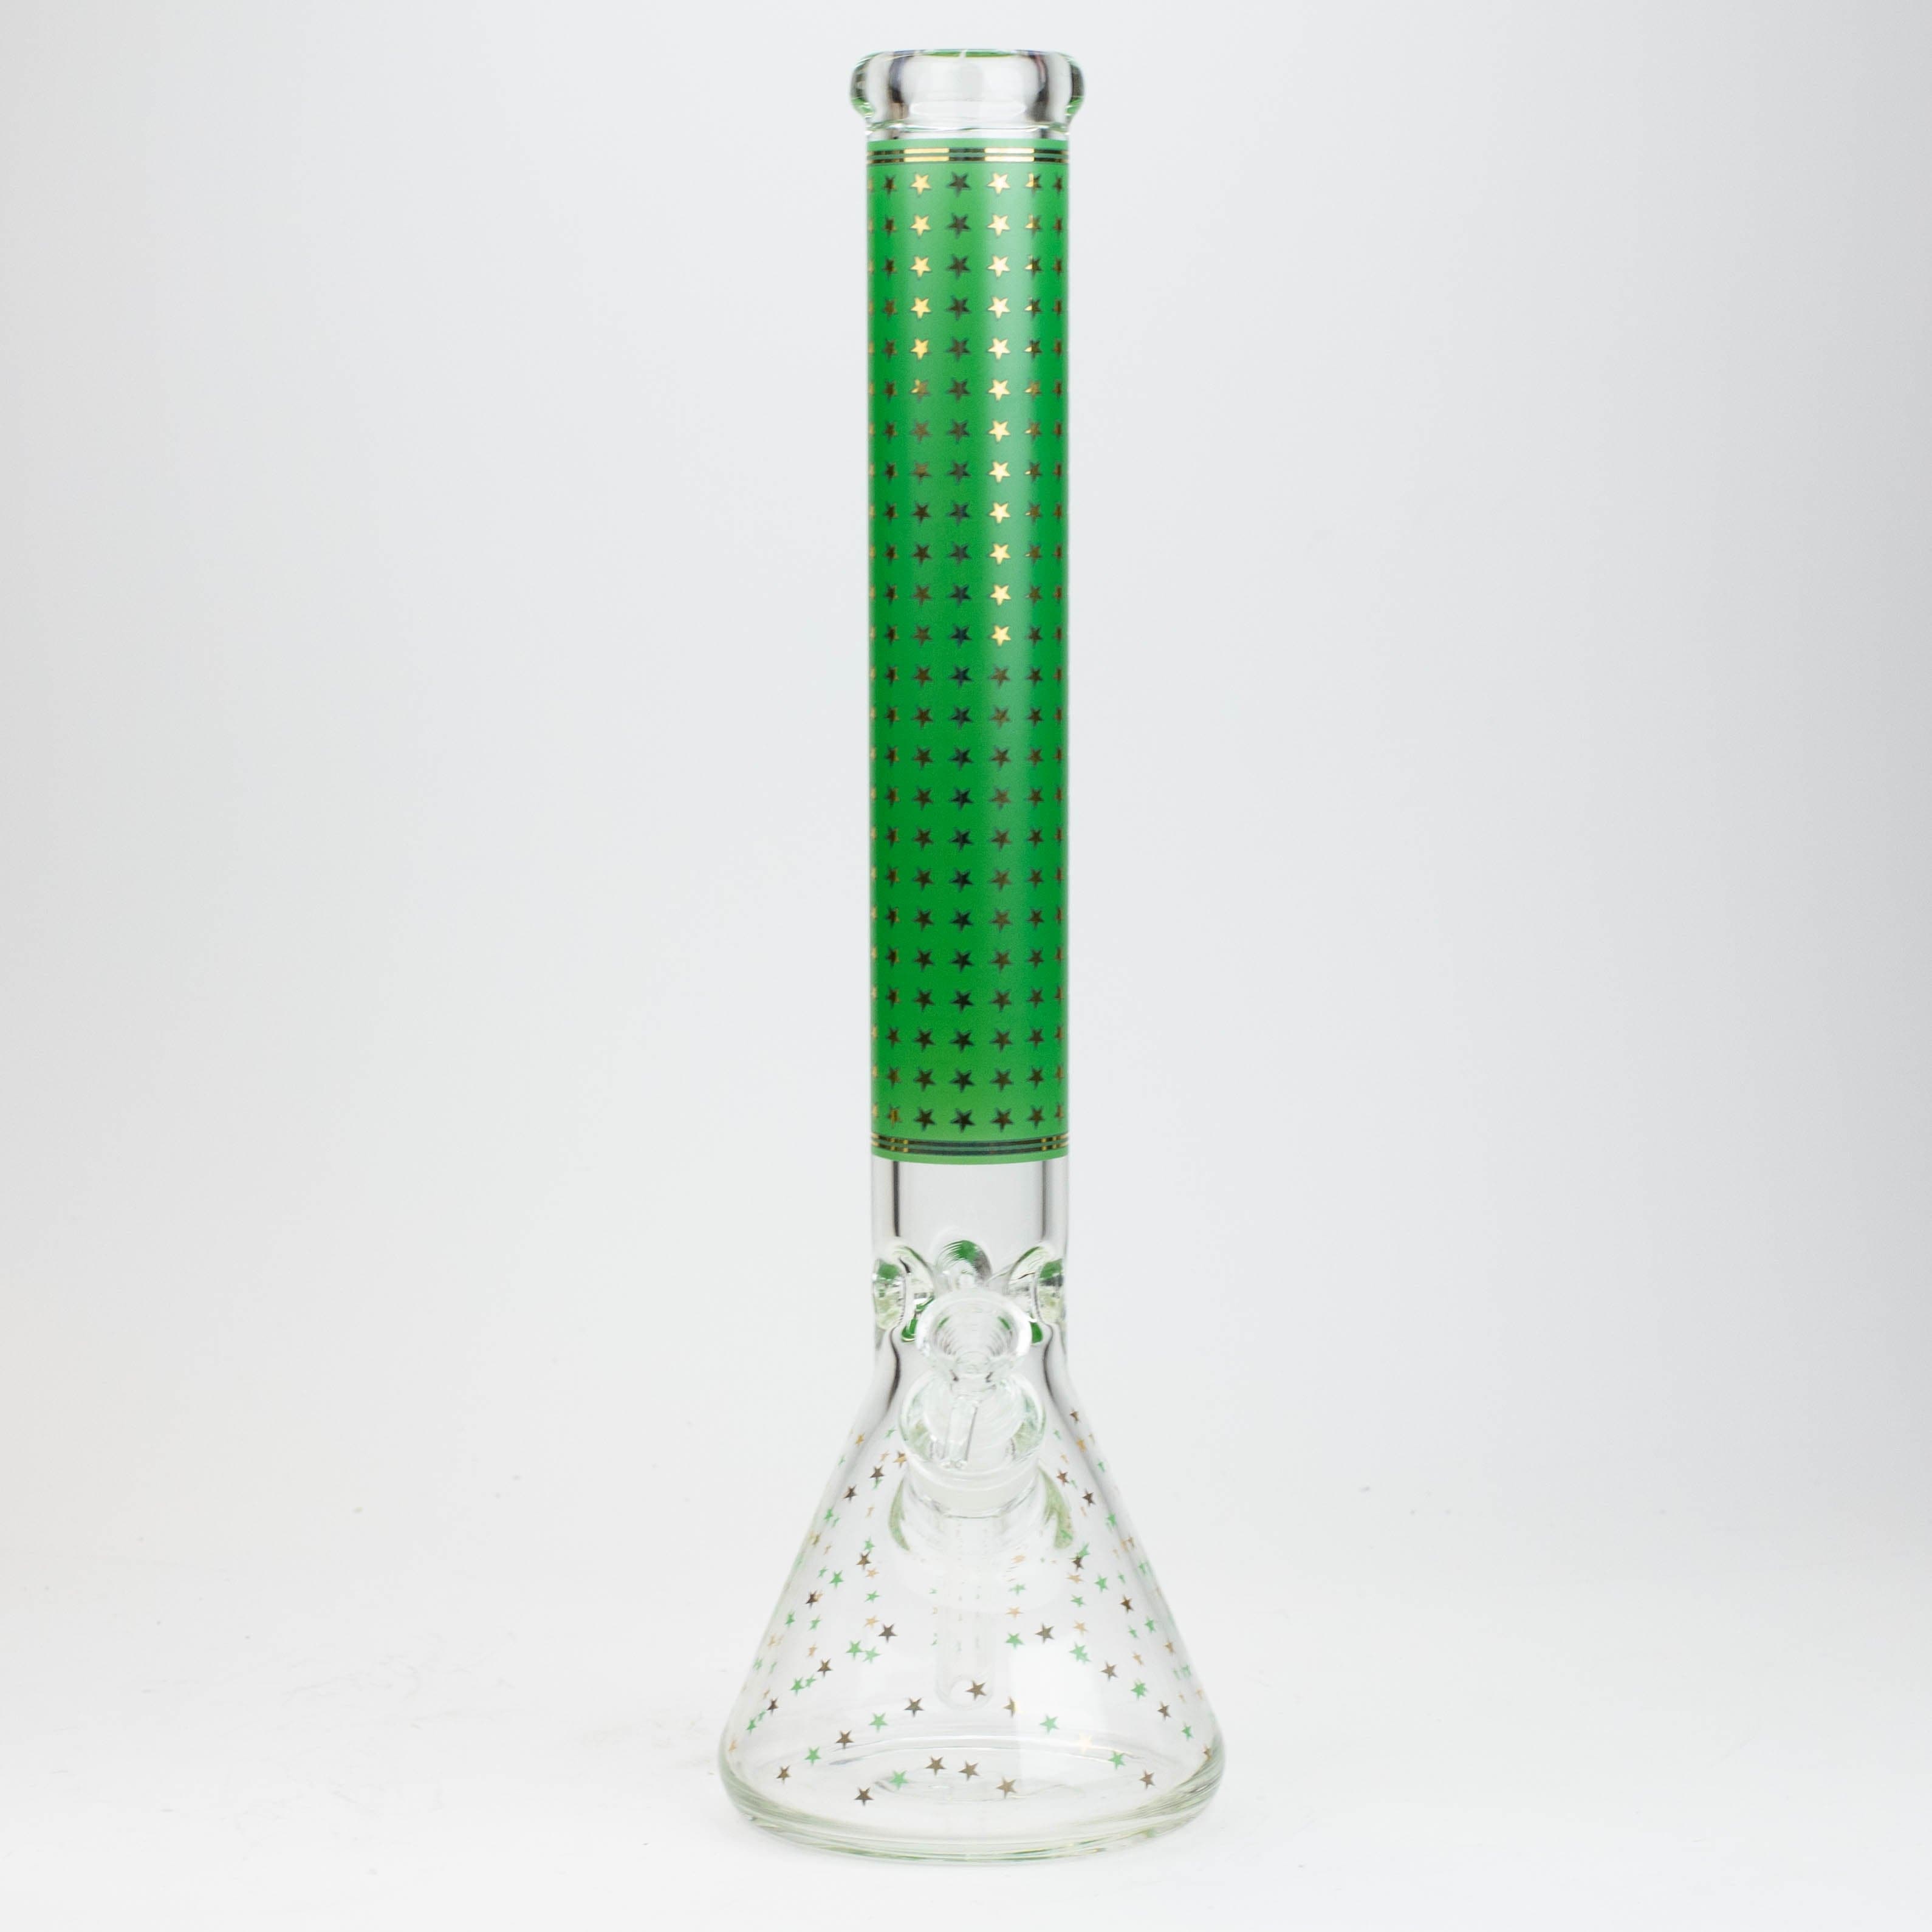 Star 7 mm glass water pipes 17.5"_6